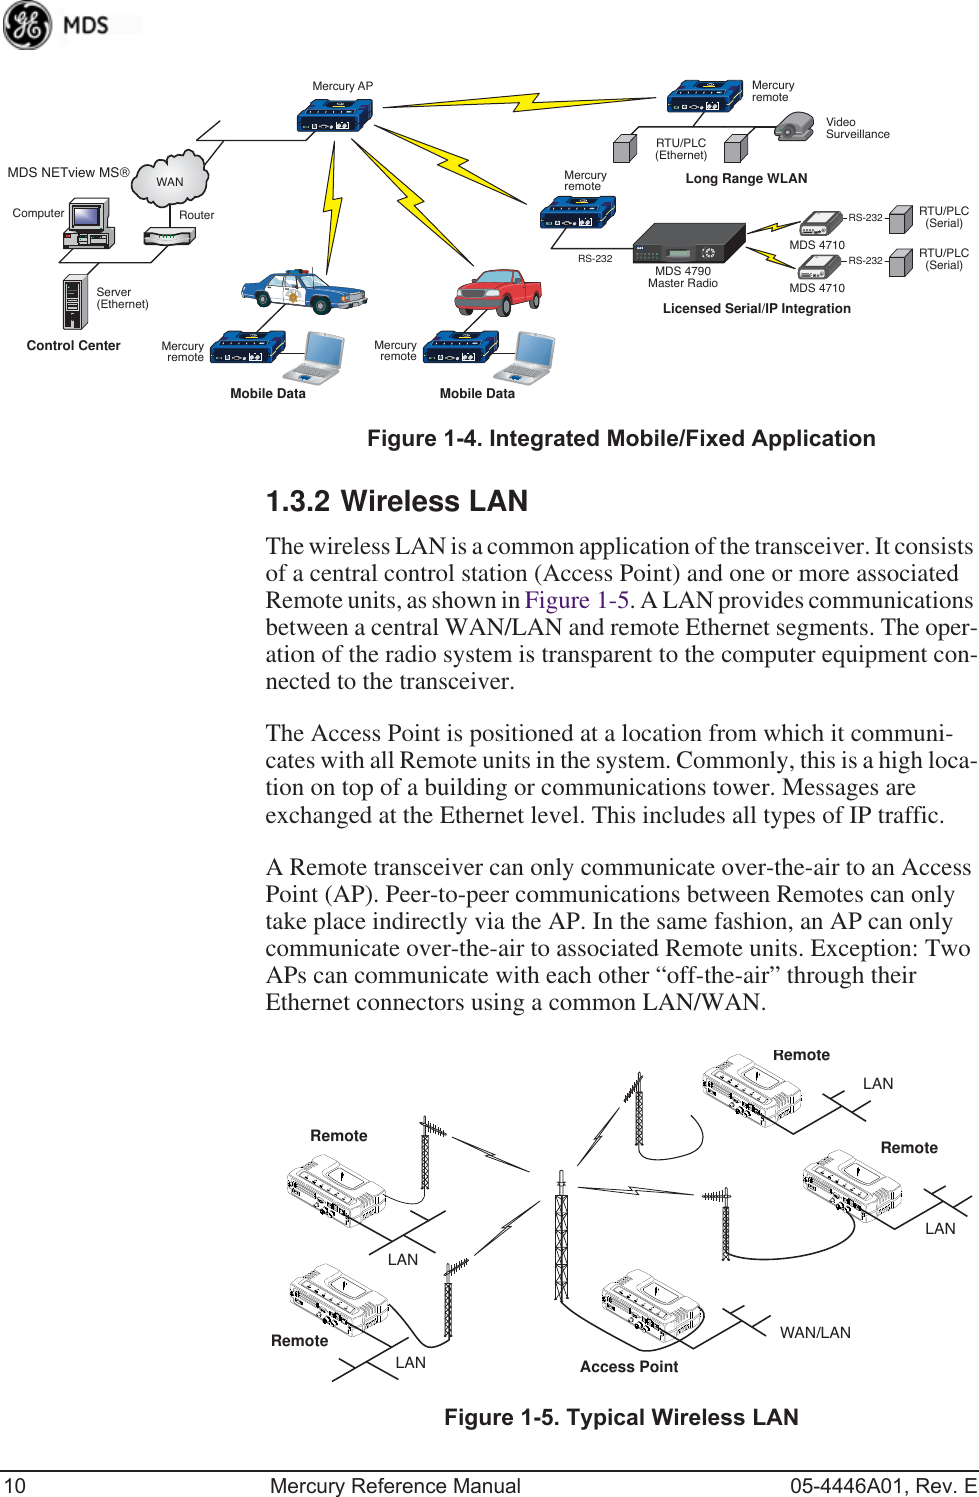 10 Mercury Reference Manual 05-4446A01, Rev. EInvisible place holderFigure 1-4. Integrated Mobile/Fixed Application1.3.2 Wireless LANThe wireless LAN is a common application of the transceiver. It consists of a central control station (Access Point) and one or more associated Remote units, as shown in Figure 1-5. A LAN provides communications between a central WAN/LAN and remote Ethernet segments. The oper-ation of the radio system is transparent to the computer equipment con-nected to the transceiver.The Access Point is positioned at a location from which it communi-cates with all Remote units in the system. Commonly, this is a high loca-tion on top of a building or communications tower. Messages are exchanged at the Ethernet level. This includes all types of IP traffic.A Remote transceiver can only communicate over-the-air to an Access Point (AP). Peer-to-peer communications between Remotes can only take place indirectly via the AP. In the same fashion, an AP can only communicate over-the-air to associated Remote units. Exception: Two APs can communicate with each other “off-the-air” through their Ethernet connectors using a common LAN/WAN.Invisible place holderFigure 1-5. Typical Wireless LANMDS 4790Master RadioLicensed Serial/IP IntegrationMercury APMDS 4710RTU/PLC(Serial)RS-232RS-232RS-232MDS 4710RTU/PLC(Serial)RTU/PLC(Ethernet)Long Range WLANMobile DataMobile DataMDS NETview MS®Server(Ethernet)Computer RouterWANVideoSurveillanceMercuryremoteControl Center MercuryremoteMercuryremoteMercuryremoteRemoteRemoteAccess PointRemoteRemoteLANLANWAN/LANLANLAN